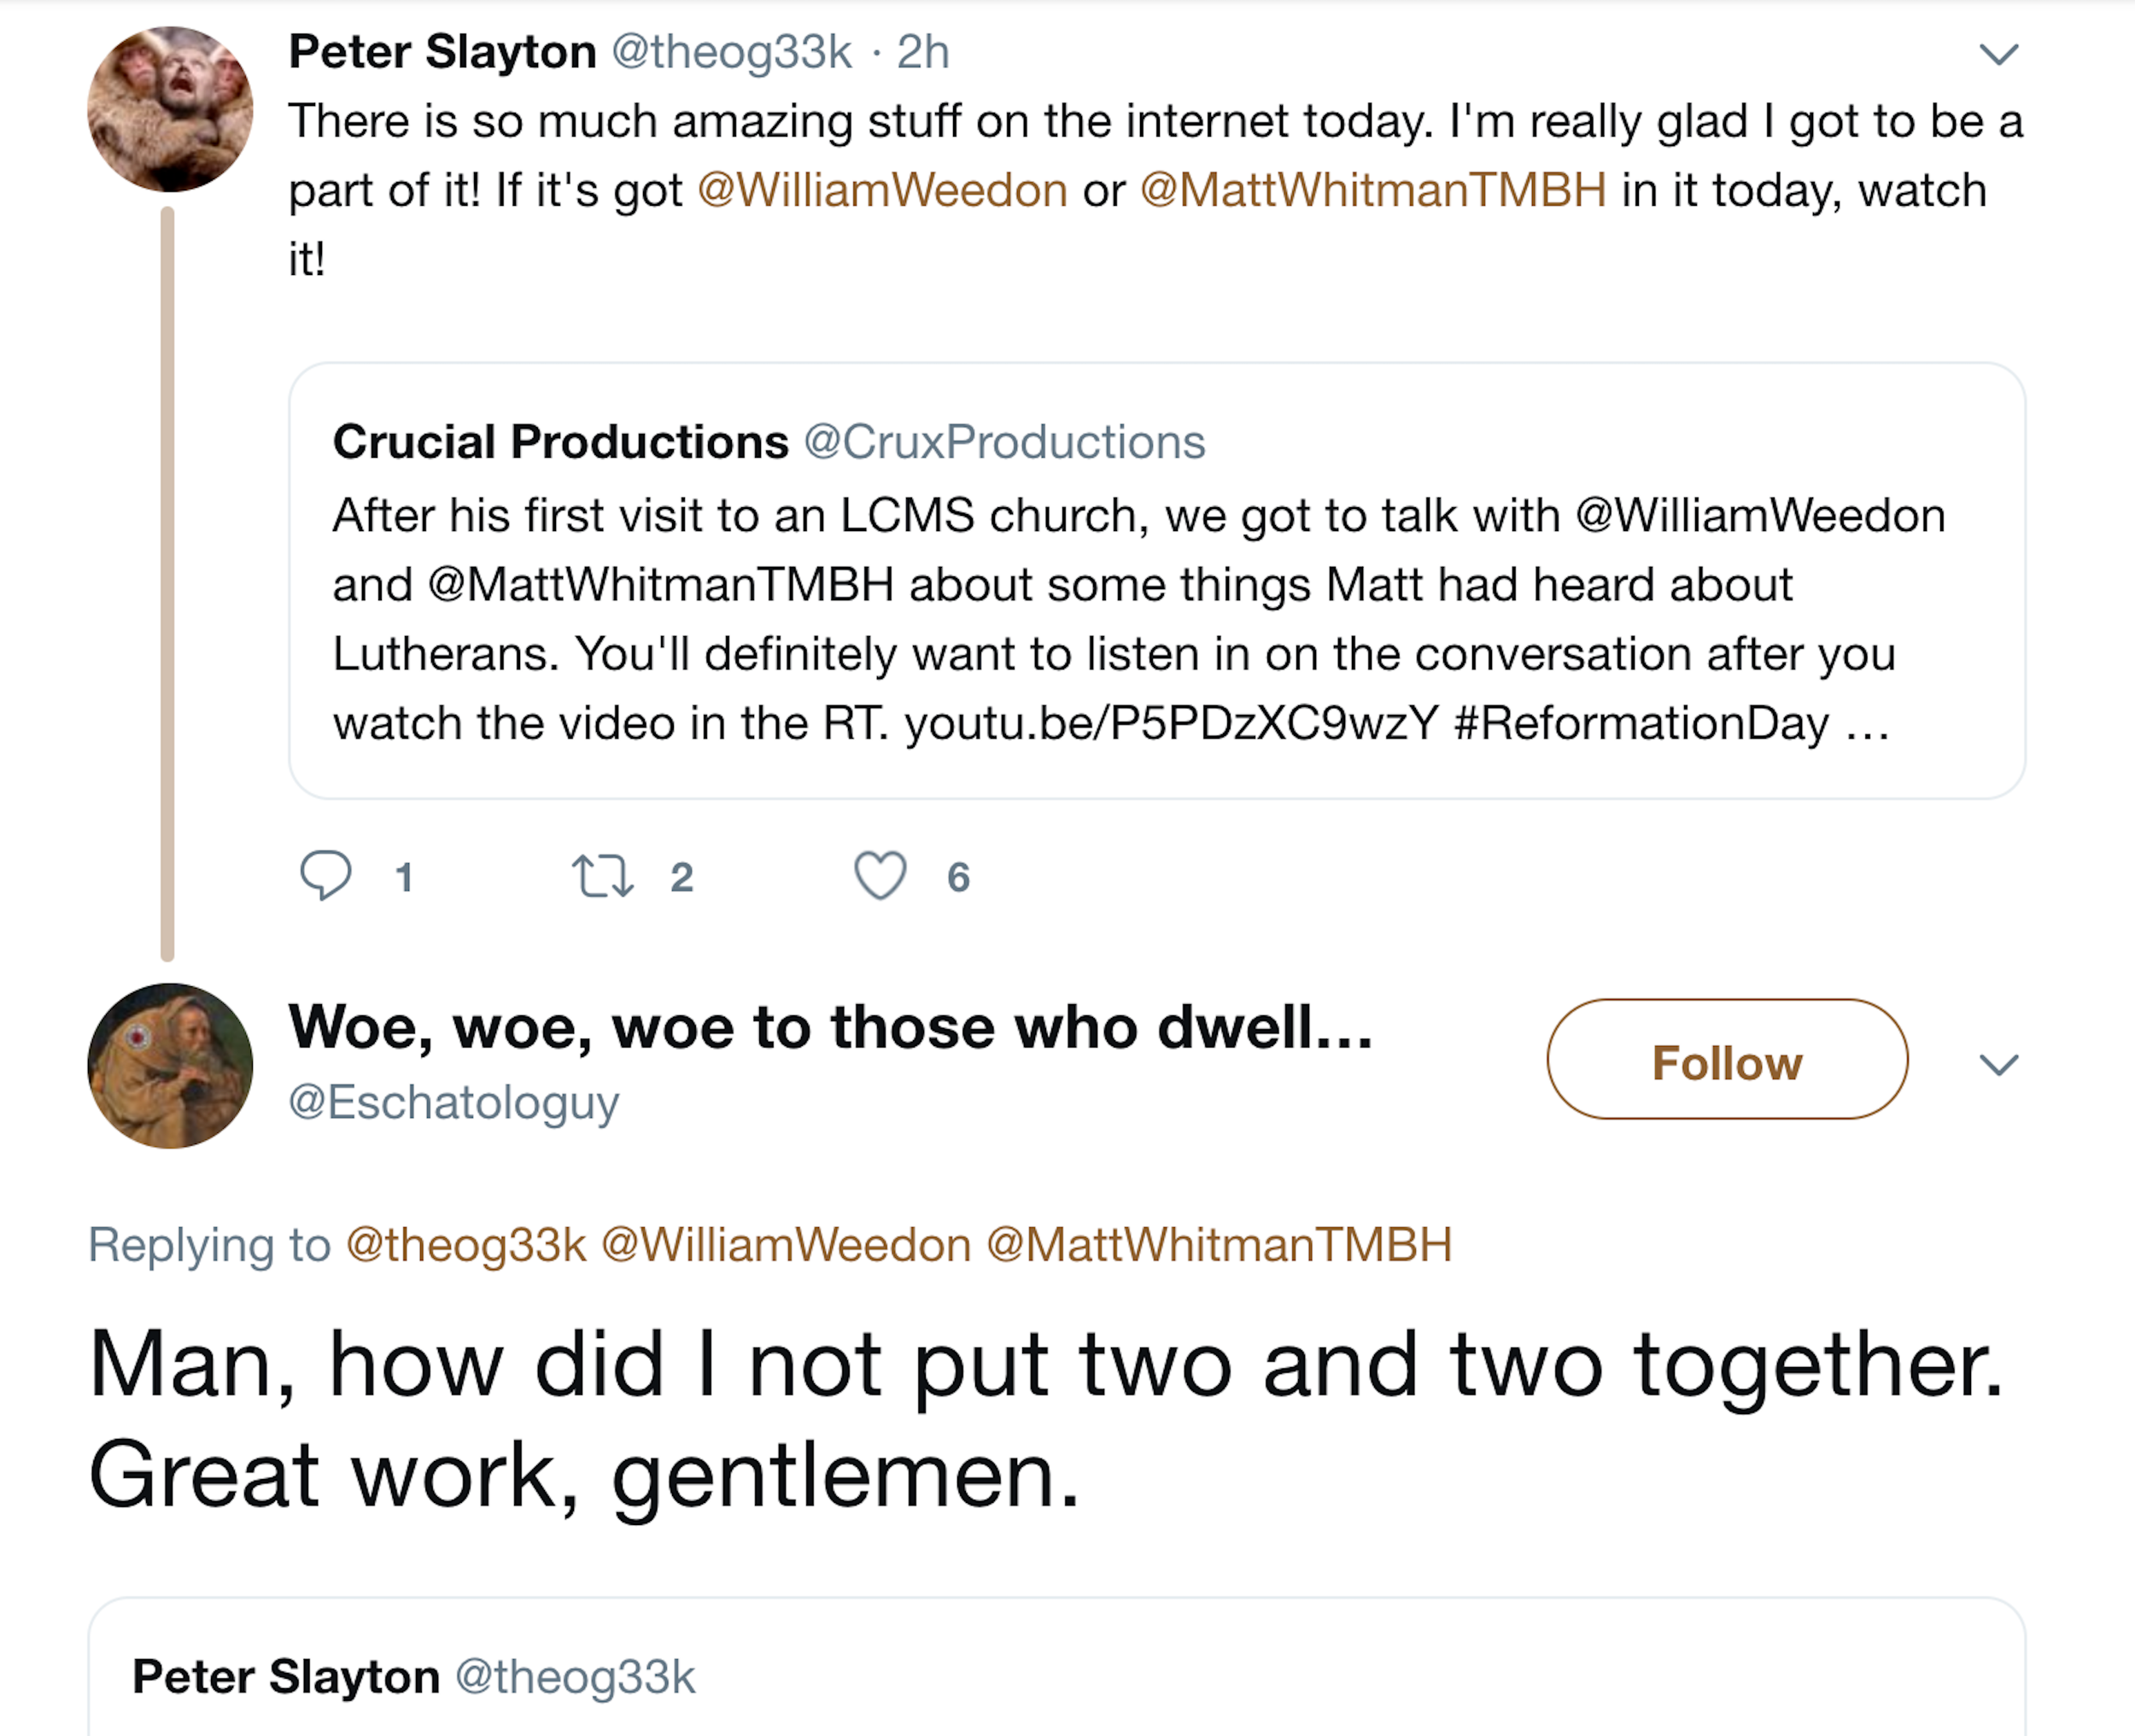 Dumperth as eschatologuy on Twitter replies to Peter Slayton. Slayton QTs a Crucial Productions tweet advertising Matt Whitman's video about going to an LCMS church. Slayton: "There is so much amazing stuff on the internet today. I'm really glad DI got to be a part of it! If it's got @WilliamWeedon or @MattWhitmanTMBH in it today, watch it! Eschatologuy responds "Man, how did I not put two and two together. Great work, gentlemen."